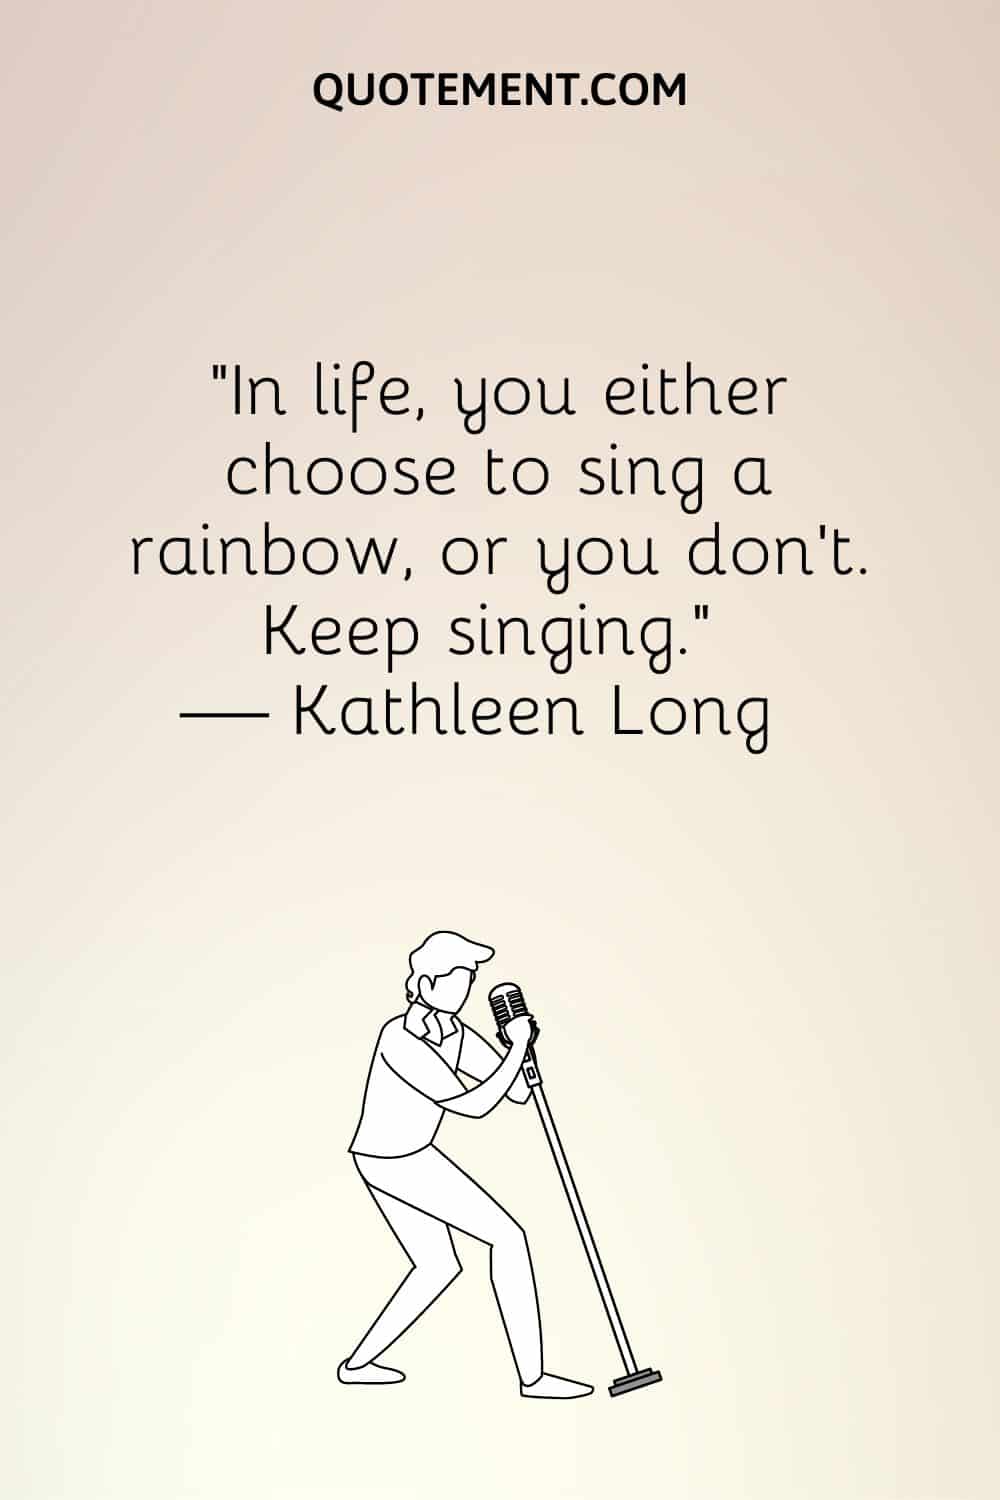 “In life, you either choose to sing a rainbow, or you don’t. Keep singing.” — Kathleen Long